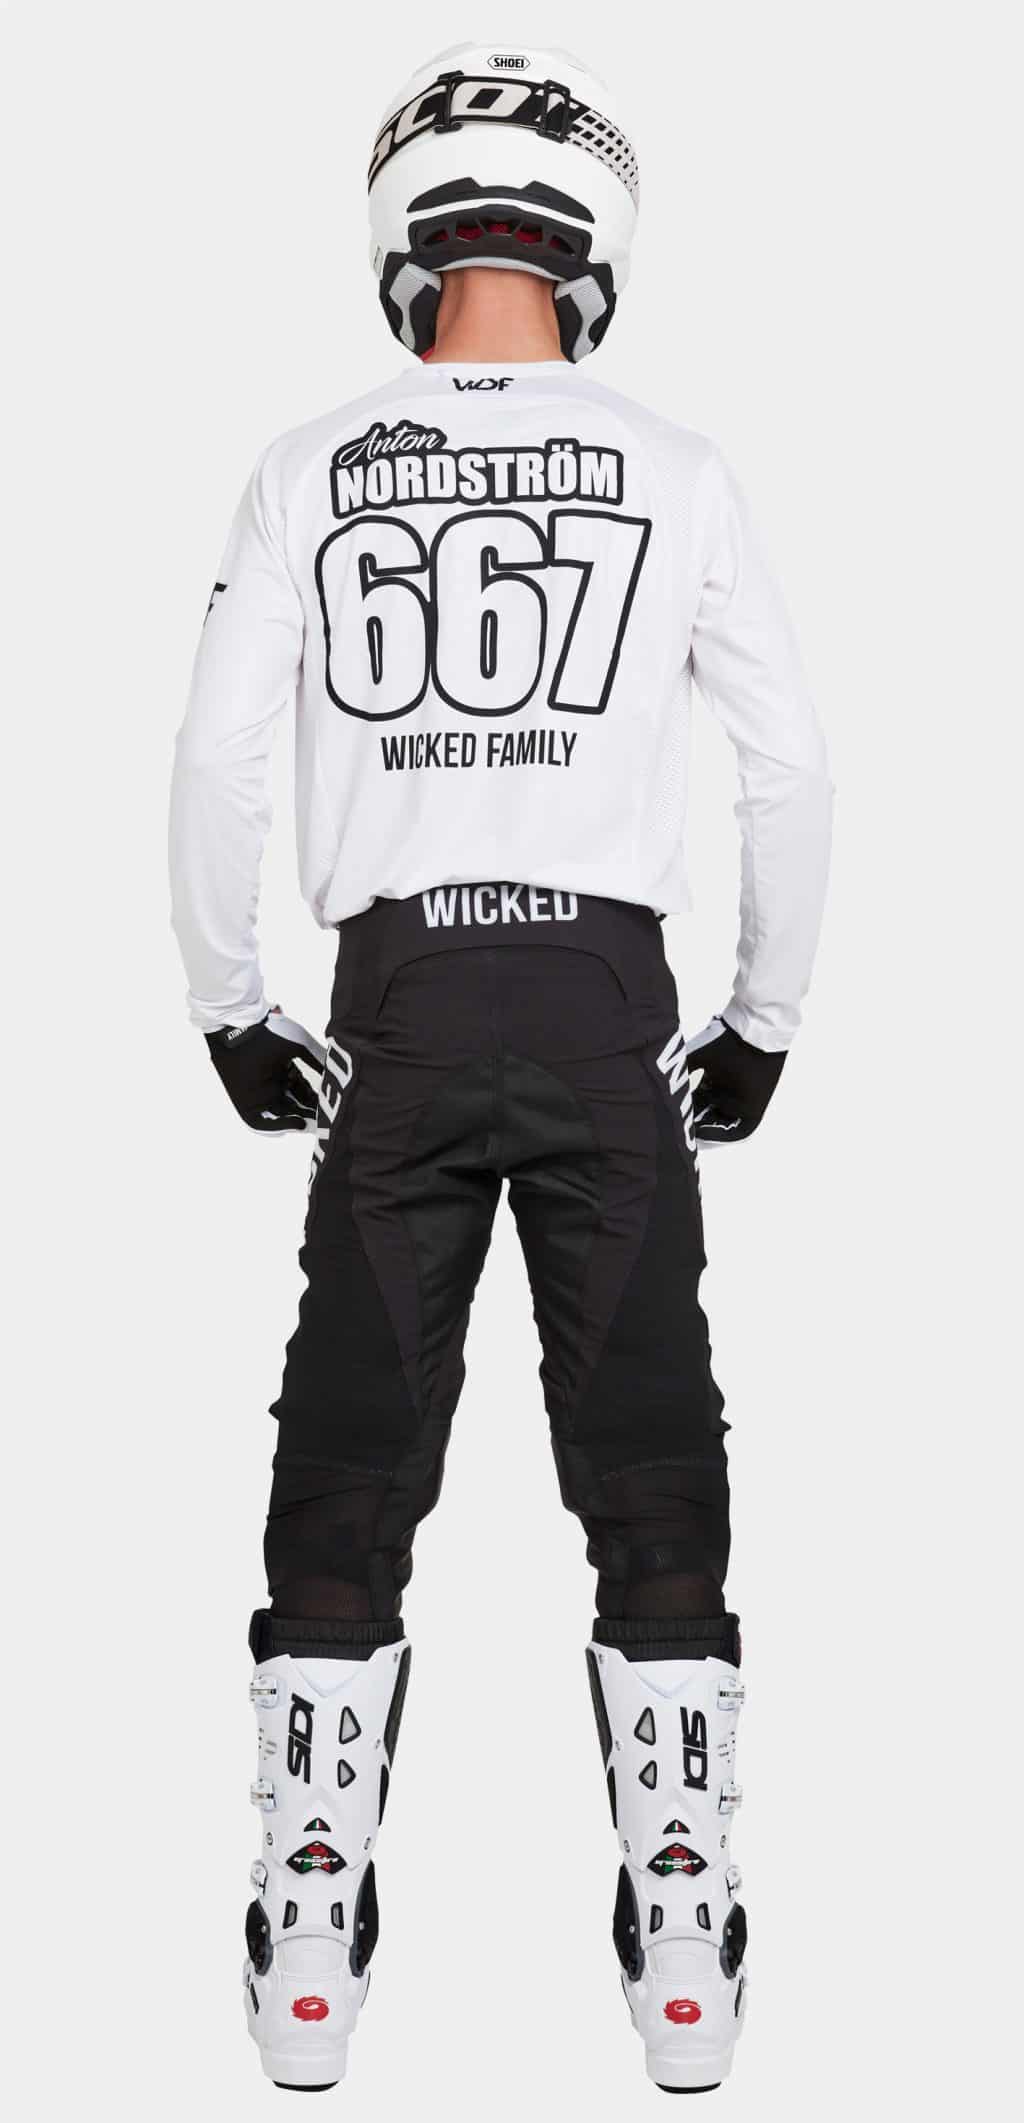 Action mx jersey back